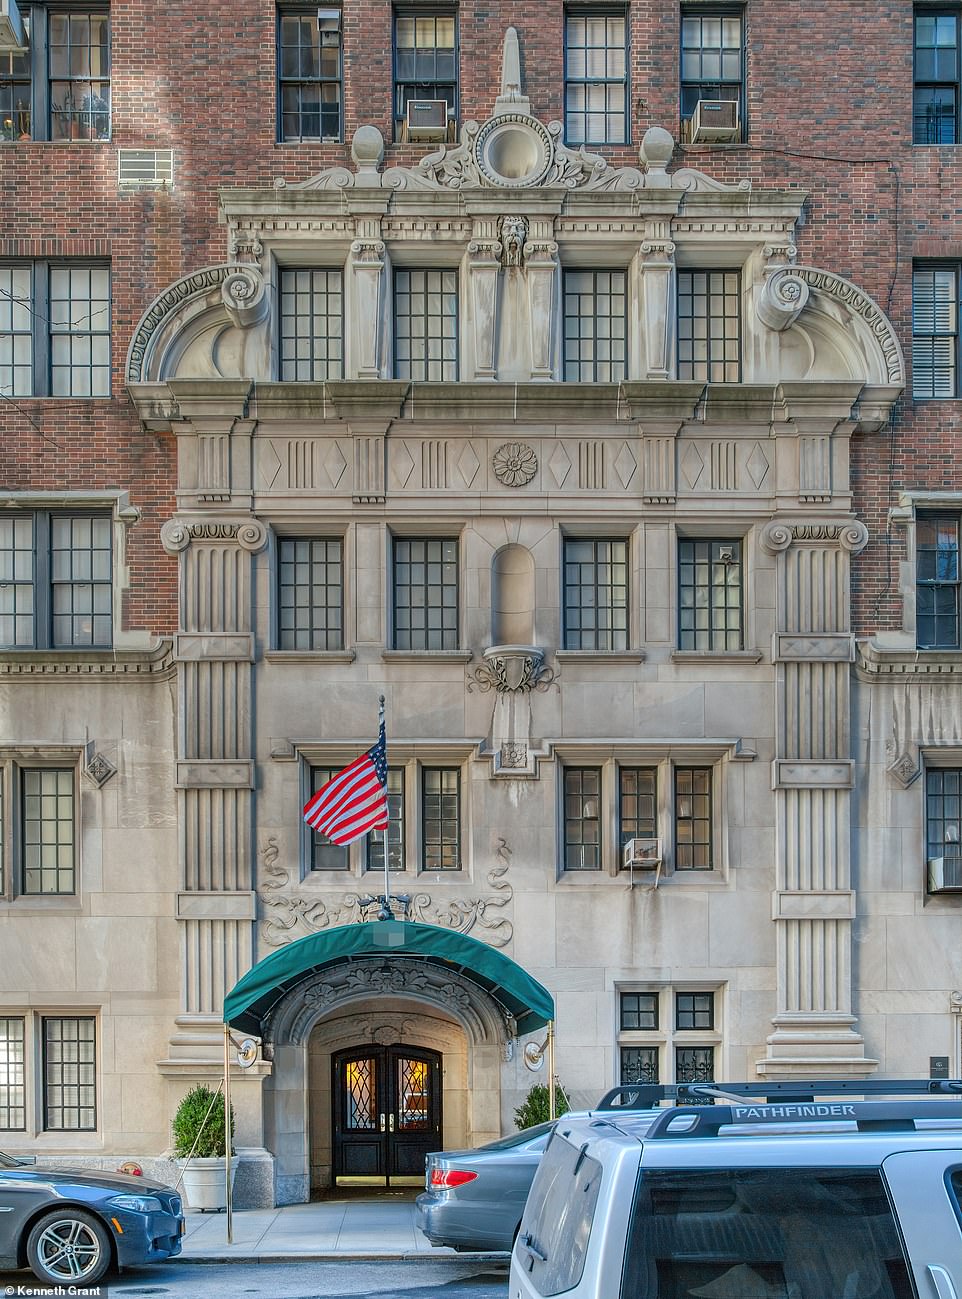 9) This 19-story Grand Dame was completed in 1929 and features a grandiose carved limestone entrance that extends to the middle of the fifth floor. Equally elaborate are the floral-paneled parapets and the corner carving of a ram’s head. Past and current pennants include Samuel Newhouse, owner of Conde Nast Magazines, Lyman Bloomingdale, founder of Bloomingdale's department store and TV broadcaster, Mike Wallace